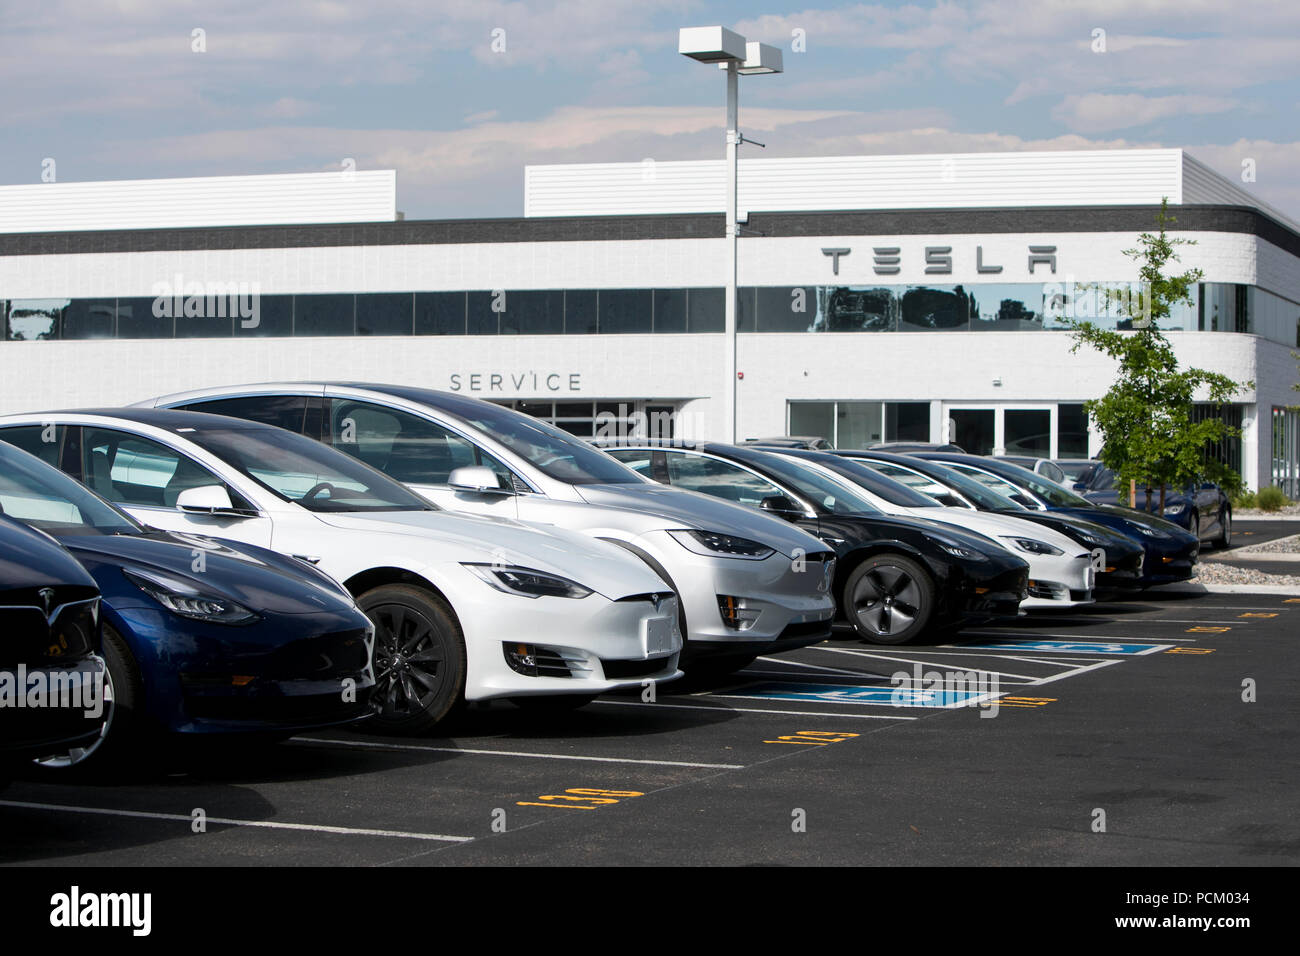 Tesla Model S, Model 3 and Model X electric vehicles at a Tesla Store location in Littleton, Colorado, on July 22, 2018. Stock Photo